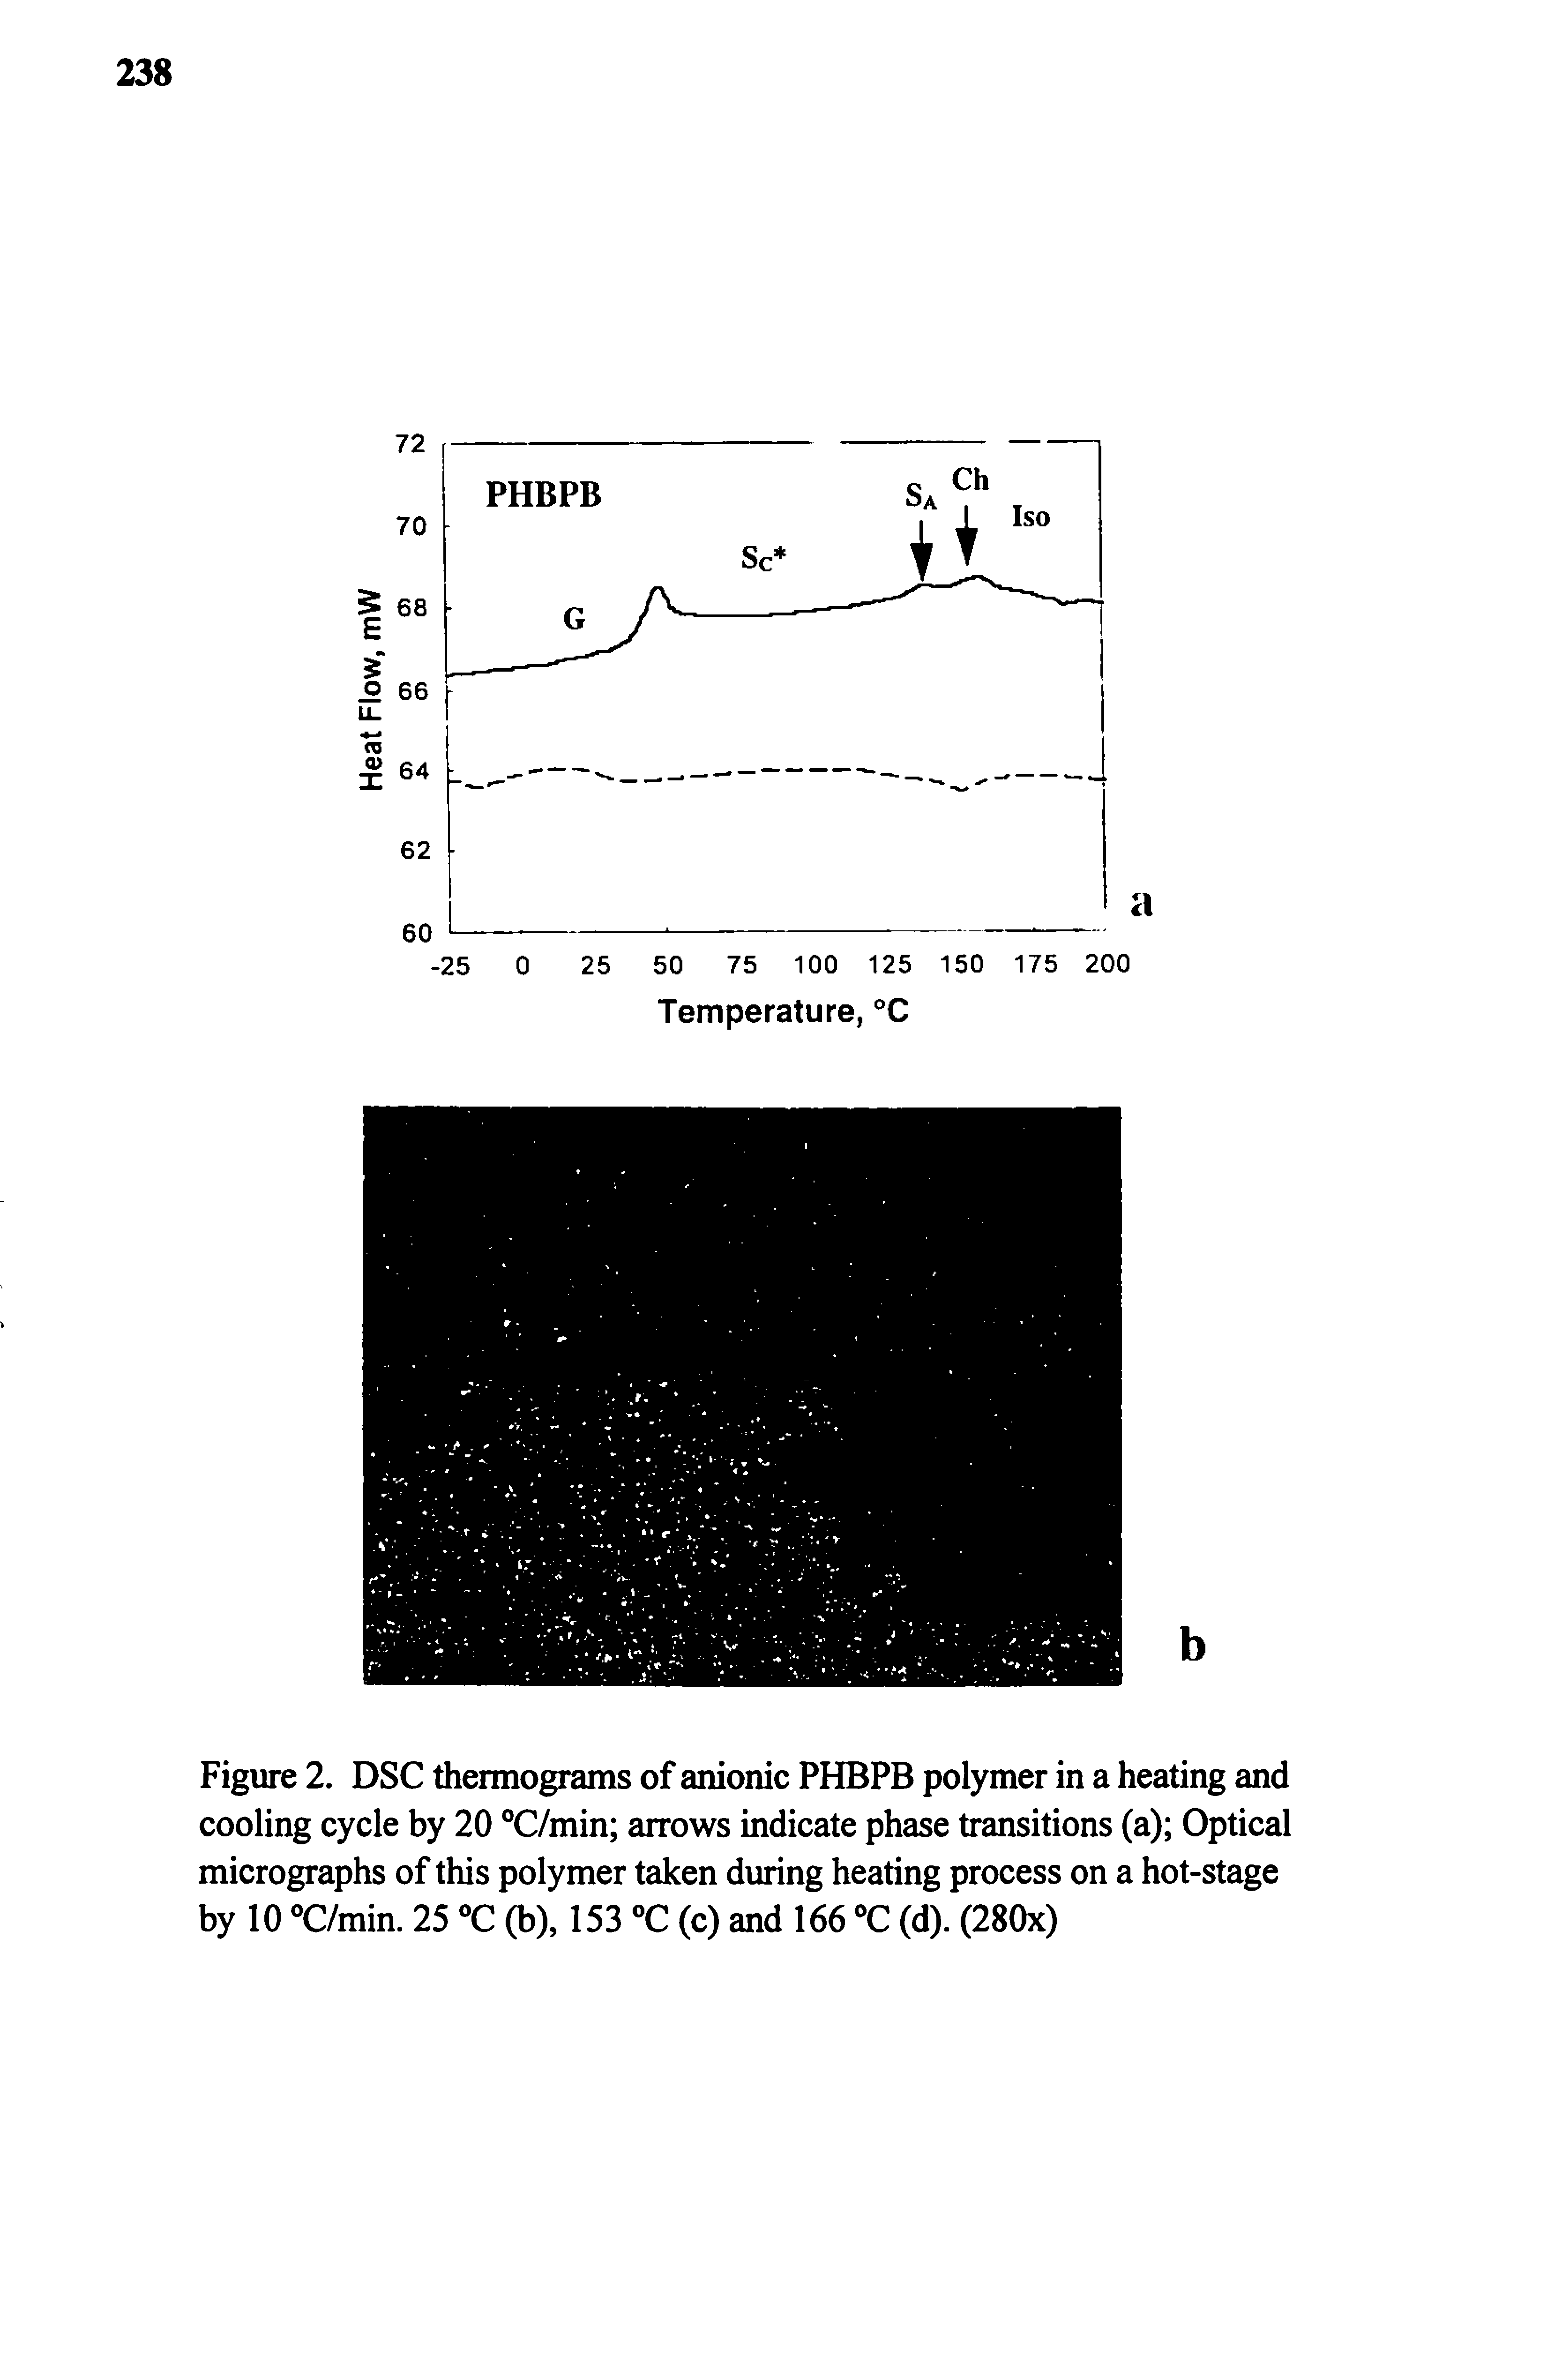 Figure 2. DSC thermograms of anionic PHBPB polymer in a heating and cooling cycle by 20 °C/min arrows indicate phase transitions (a) Optical micrographs of this polymer taken during heating process on a hot-stage by 10 °C/min. 25 °C (b), 153 (c) and 166 T (d). (280x)...